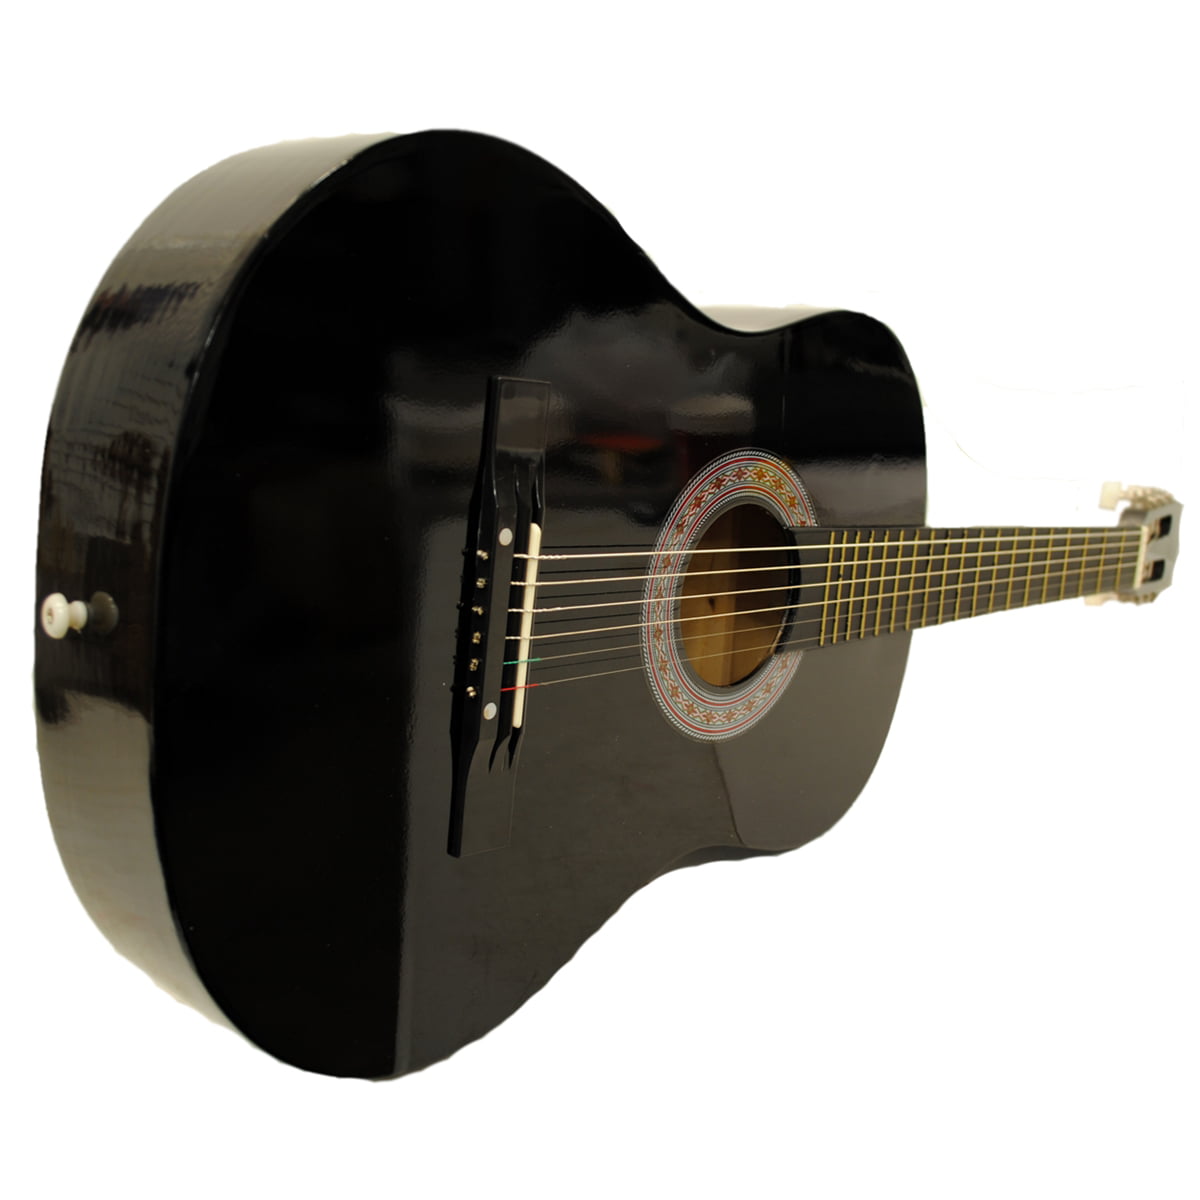 JRPKSTBK-M Black Right Handed Other 6 String Mini Electric Double Cutaway Guitar Prelude Pack Beautiful 